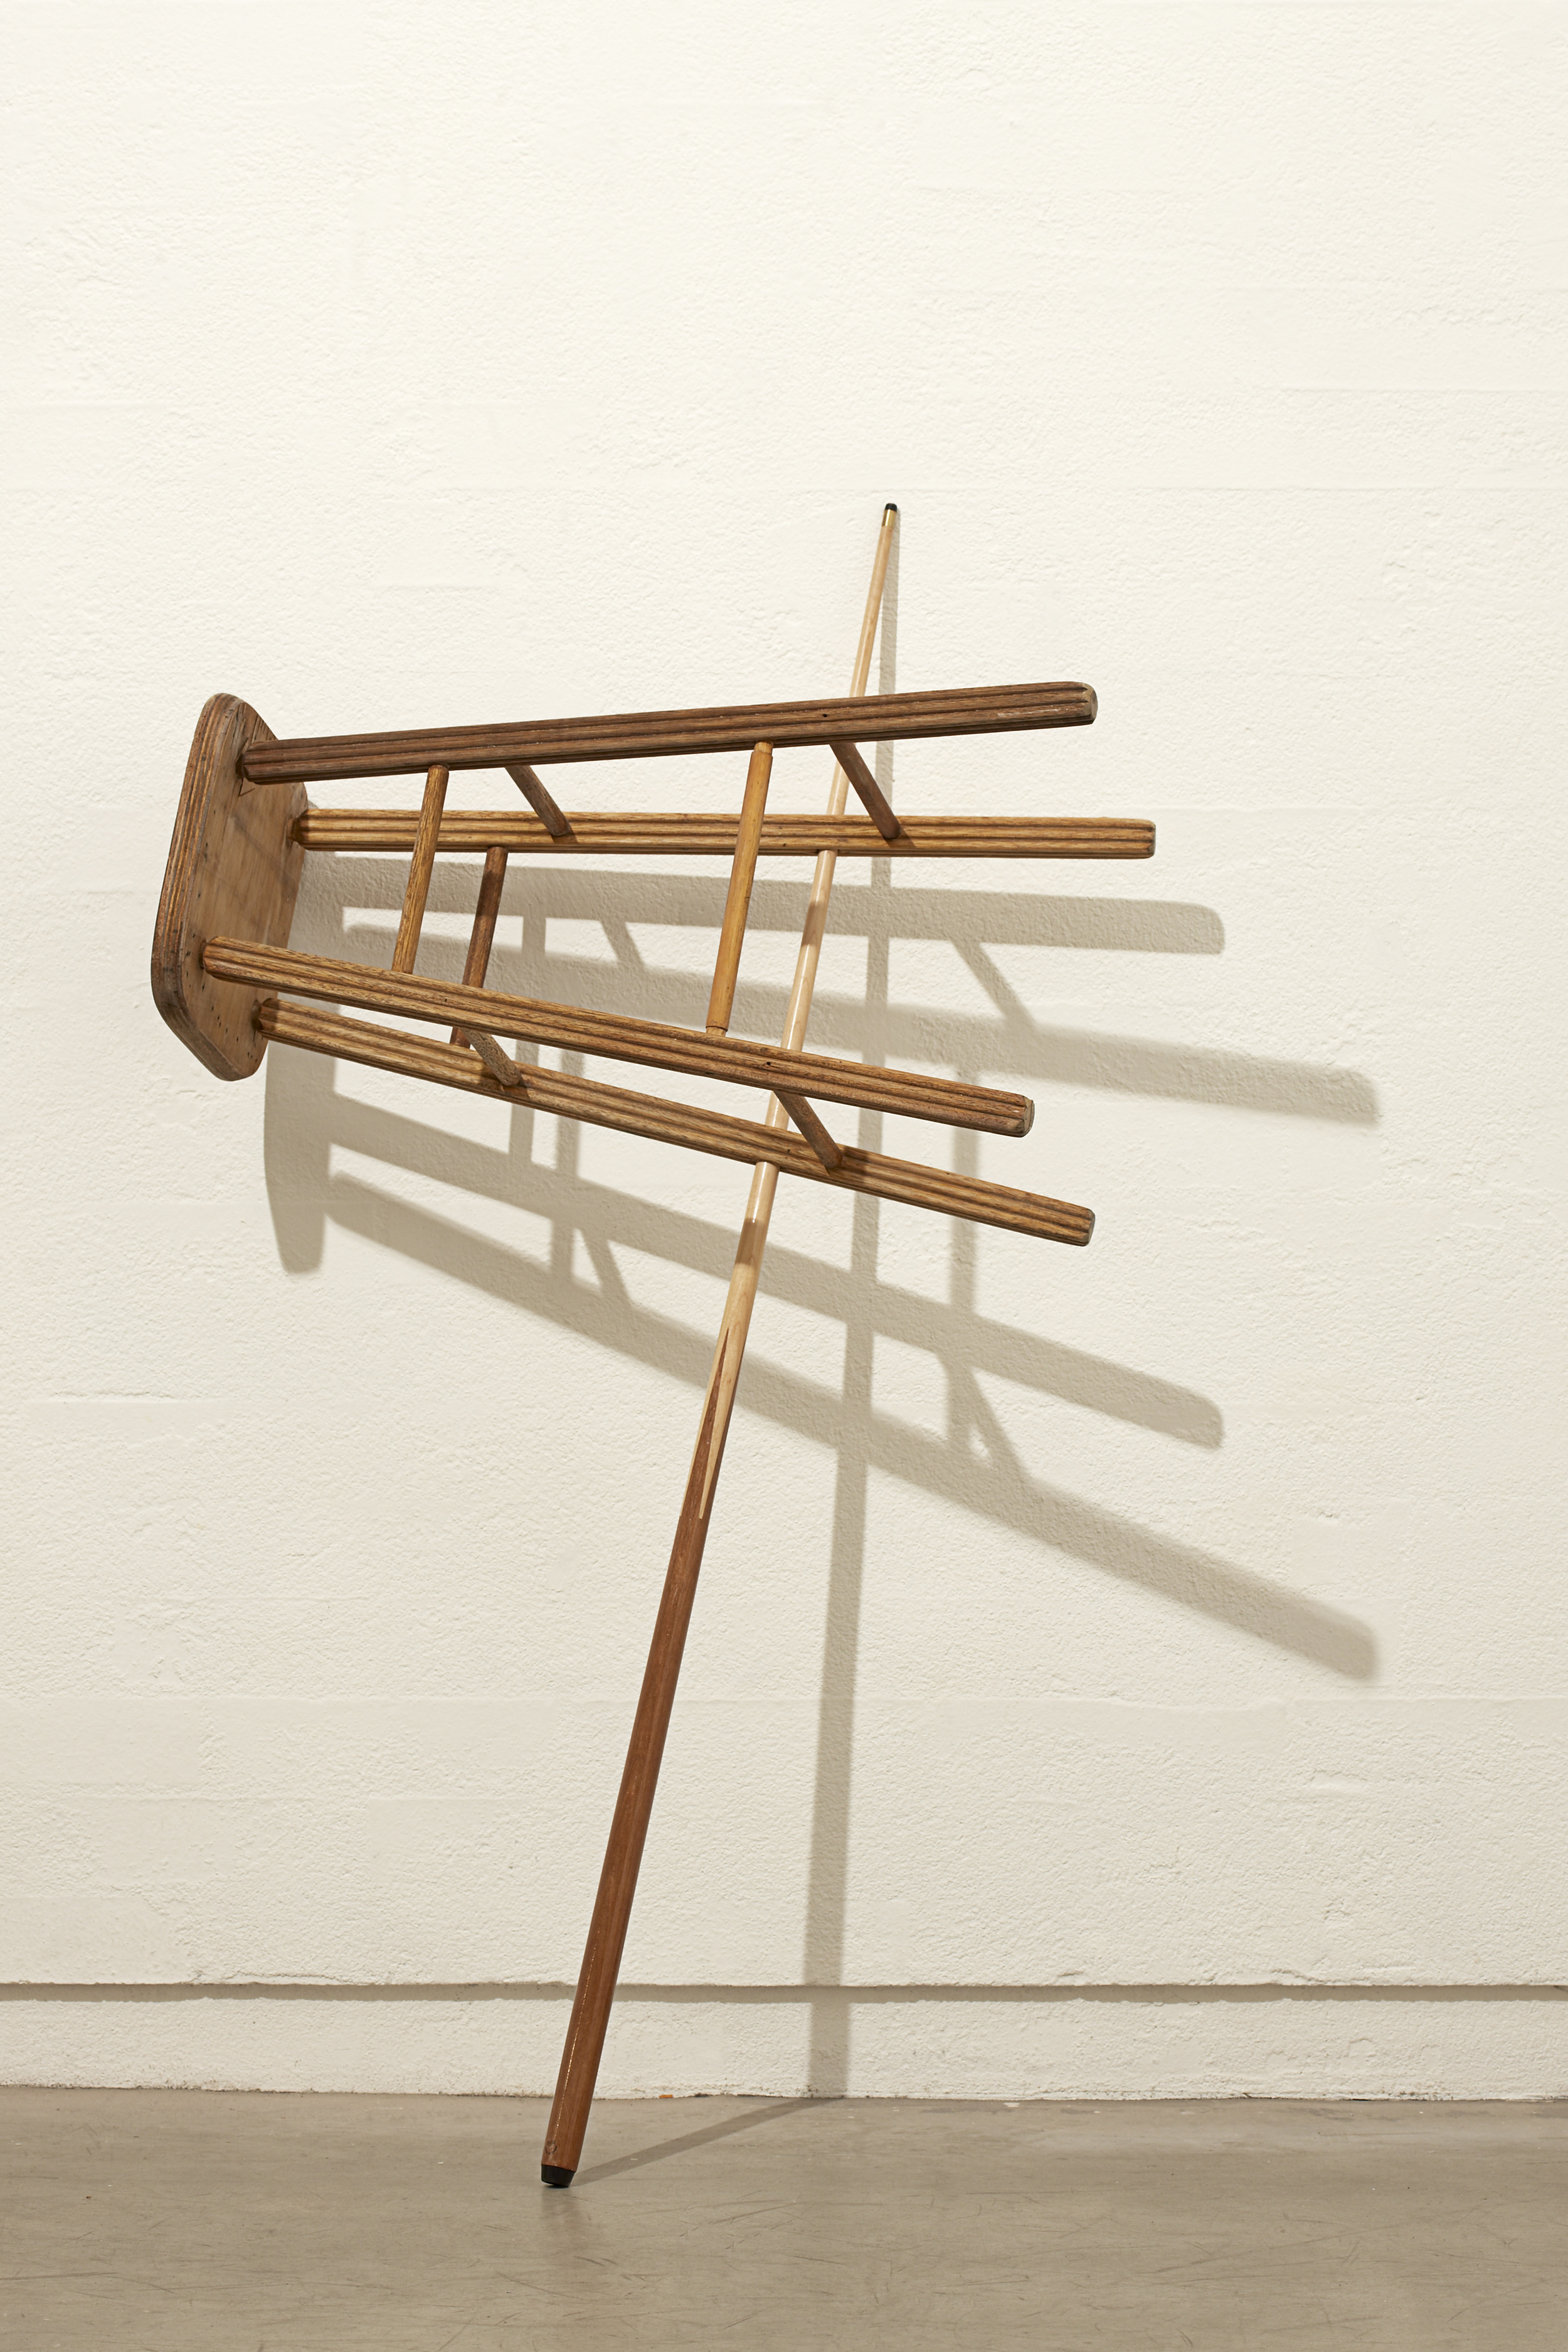  Cue/Stool, 2009 Cue and Stool 136 x 80 x 55 cm as exhibited 